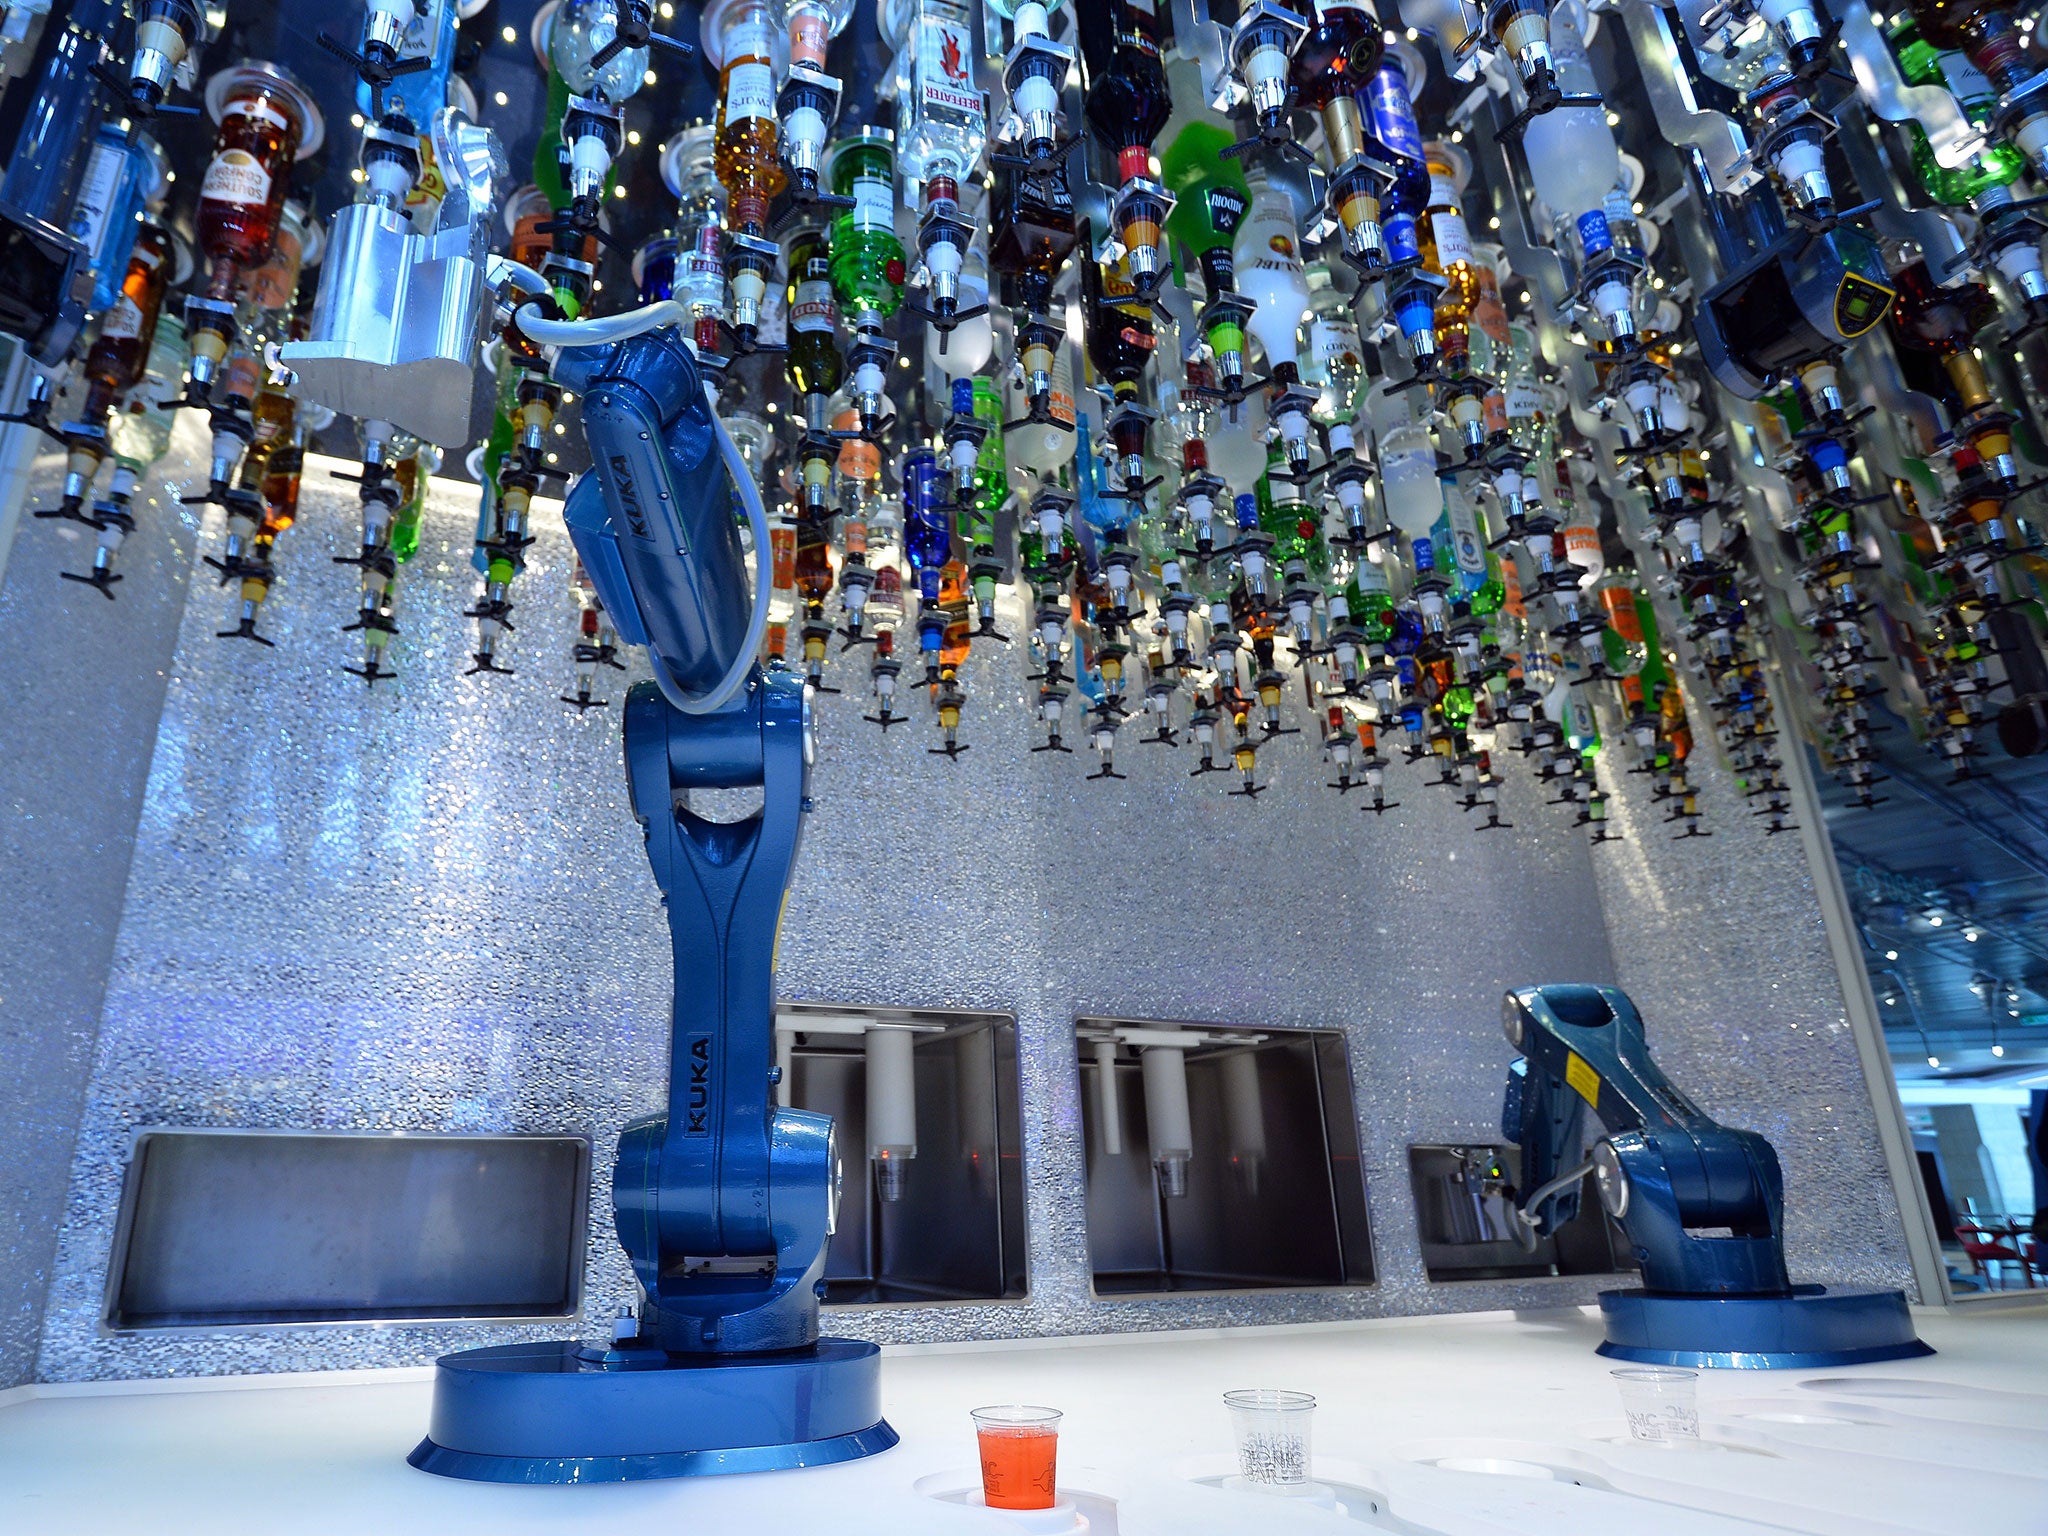 Robots make cocktails, ordered via a tablet in the bionic bar on board Royal Caribbean's latest cruise liner 'The Anthem Of The Seas', a 4,905-passenger ship which is docked in Southampton. The ship is billed as the most technologically advanced cruise ve